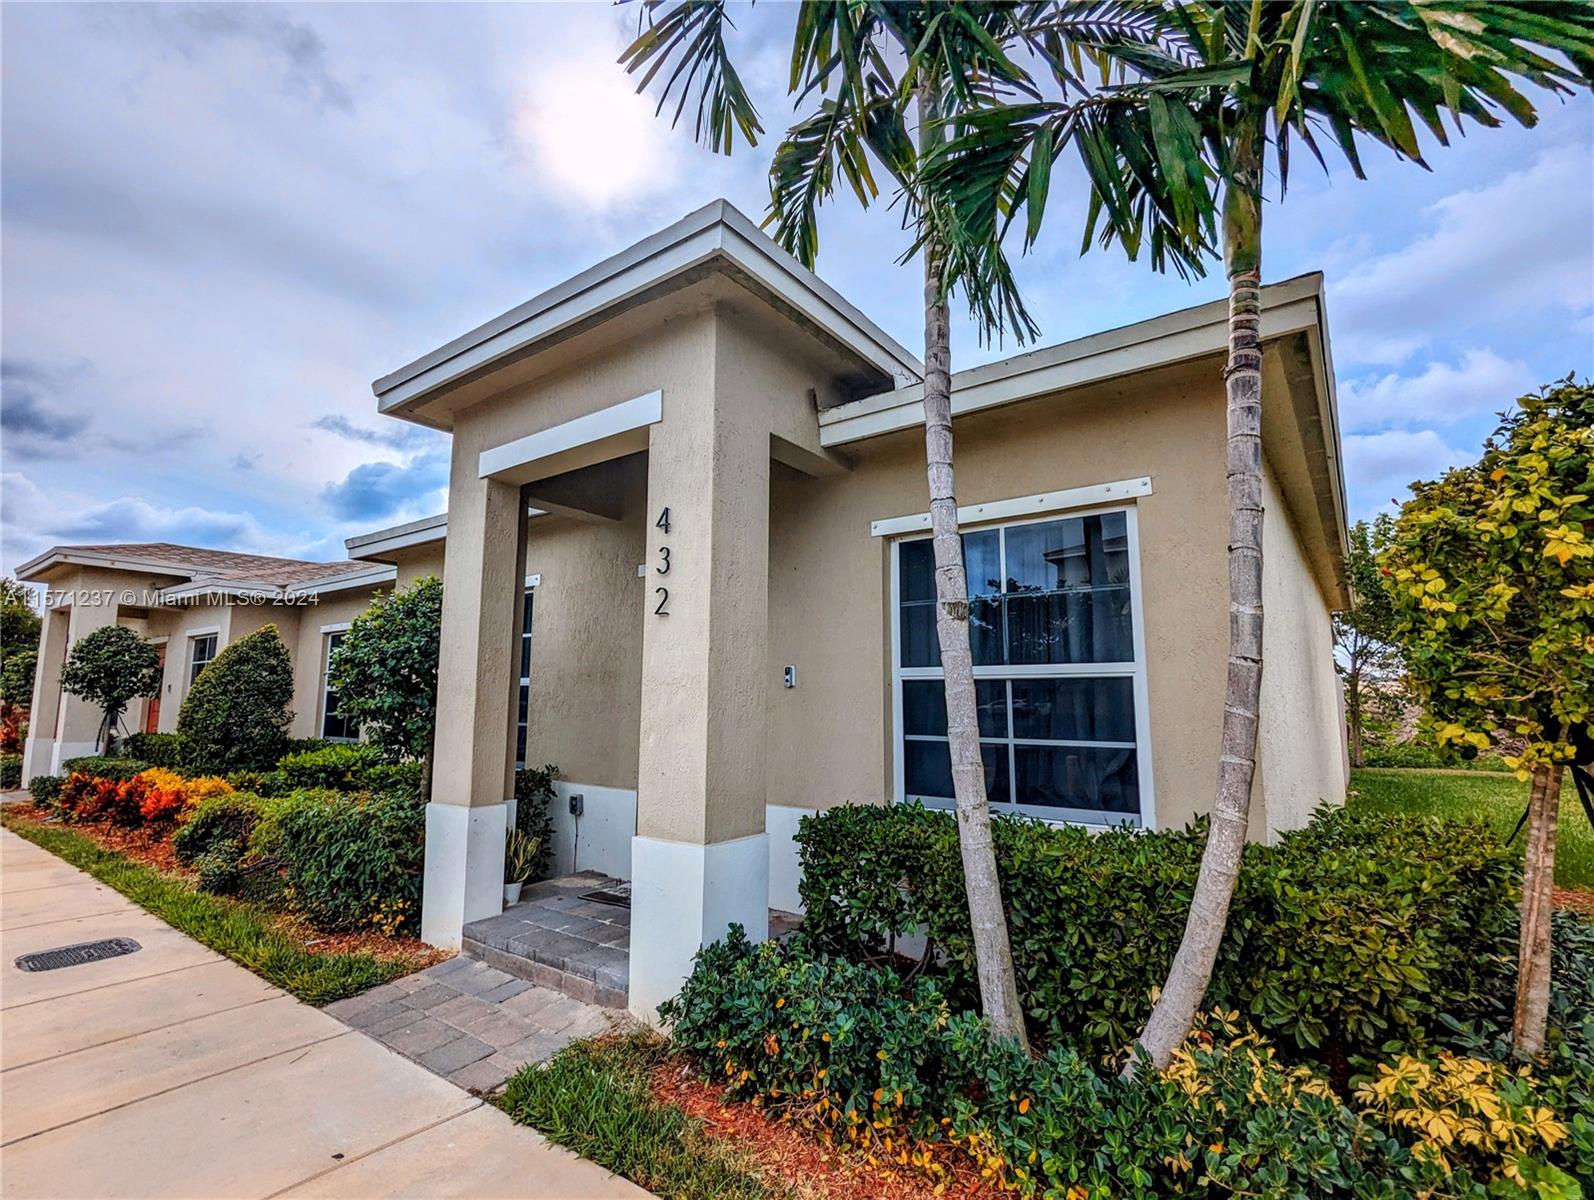 Newly built one-story villa in the Key Pointe Community. This 3 bedroom 2 bathroom home features tile flooring, natural bright lighting, stainless steel appliances, a washer and dryer, and a fenced patio. The community features a swimming pool, clubhouse, gym, playground and more. Low HOA fee of $105/month! Conveniently located close to shopping outlets, Florida's Turnpike, and the Florida Keys. Well-qualified buyers ask how you can assume the 2.80% FHA loan!